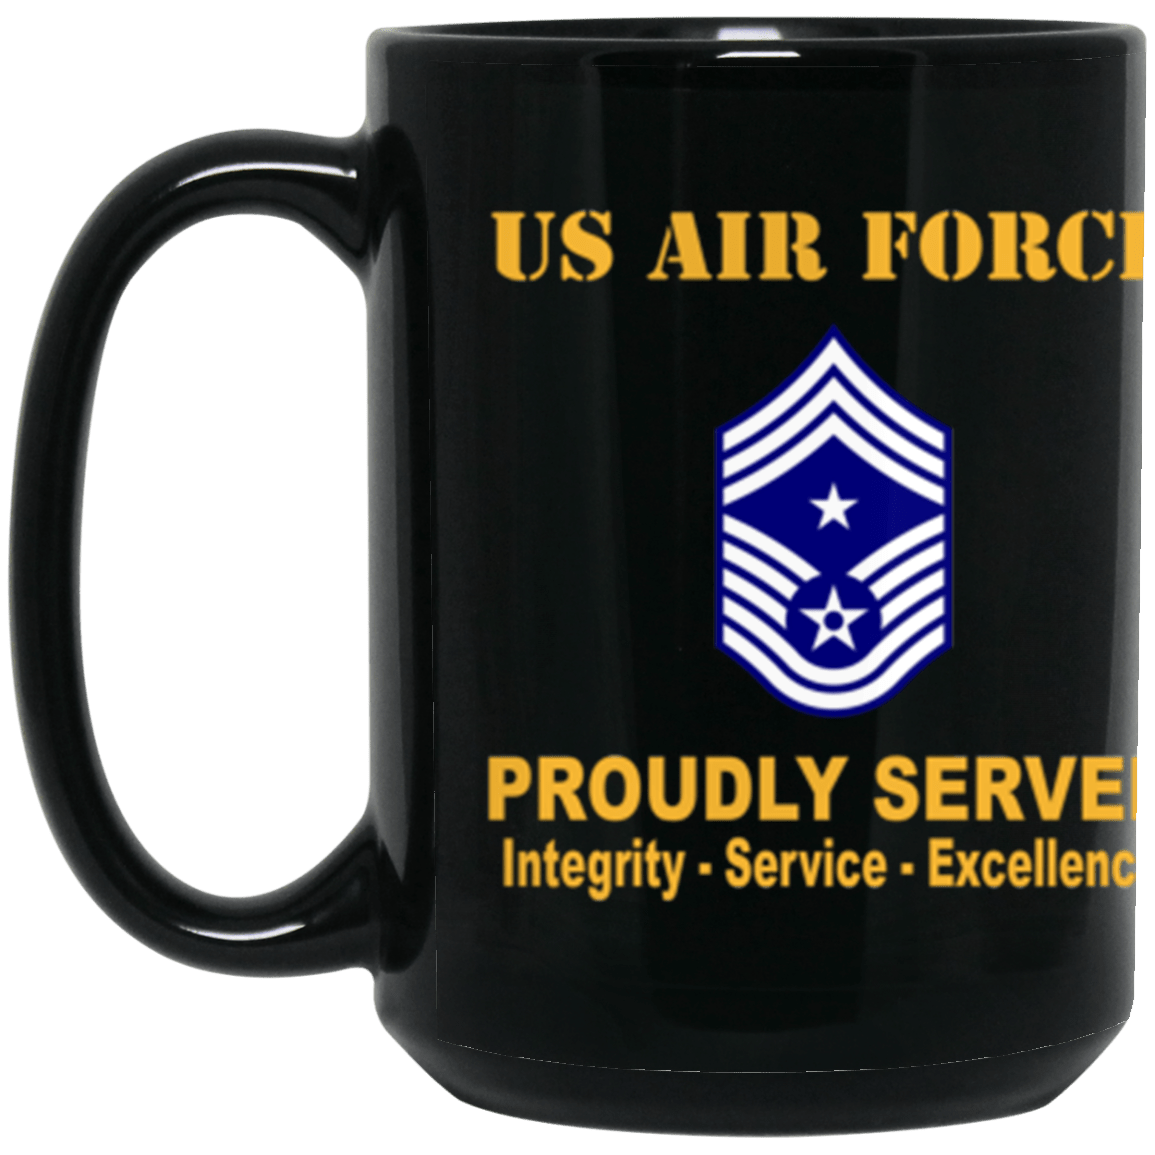 US Air Force E-9 Command Chief Master Sergeant CCM E9 Noncommissioned Officer Ranks Proudly Served Core Values 15 oz. Black Mug-Drinkware-Veterans Nation